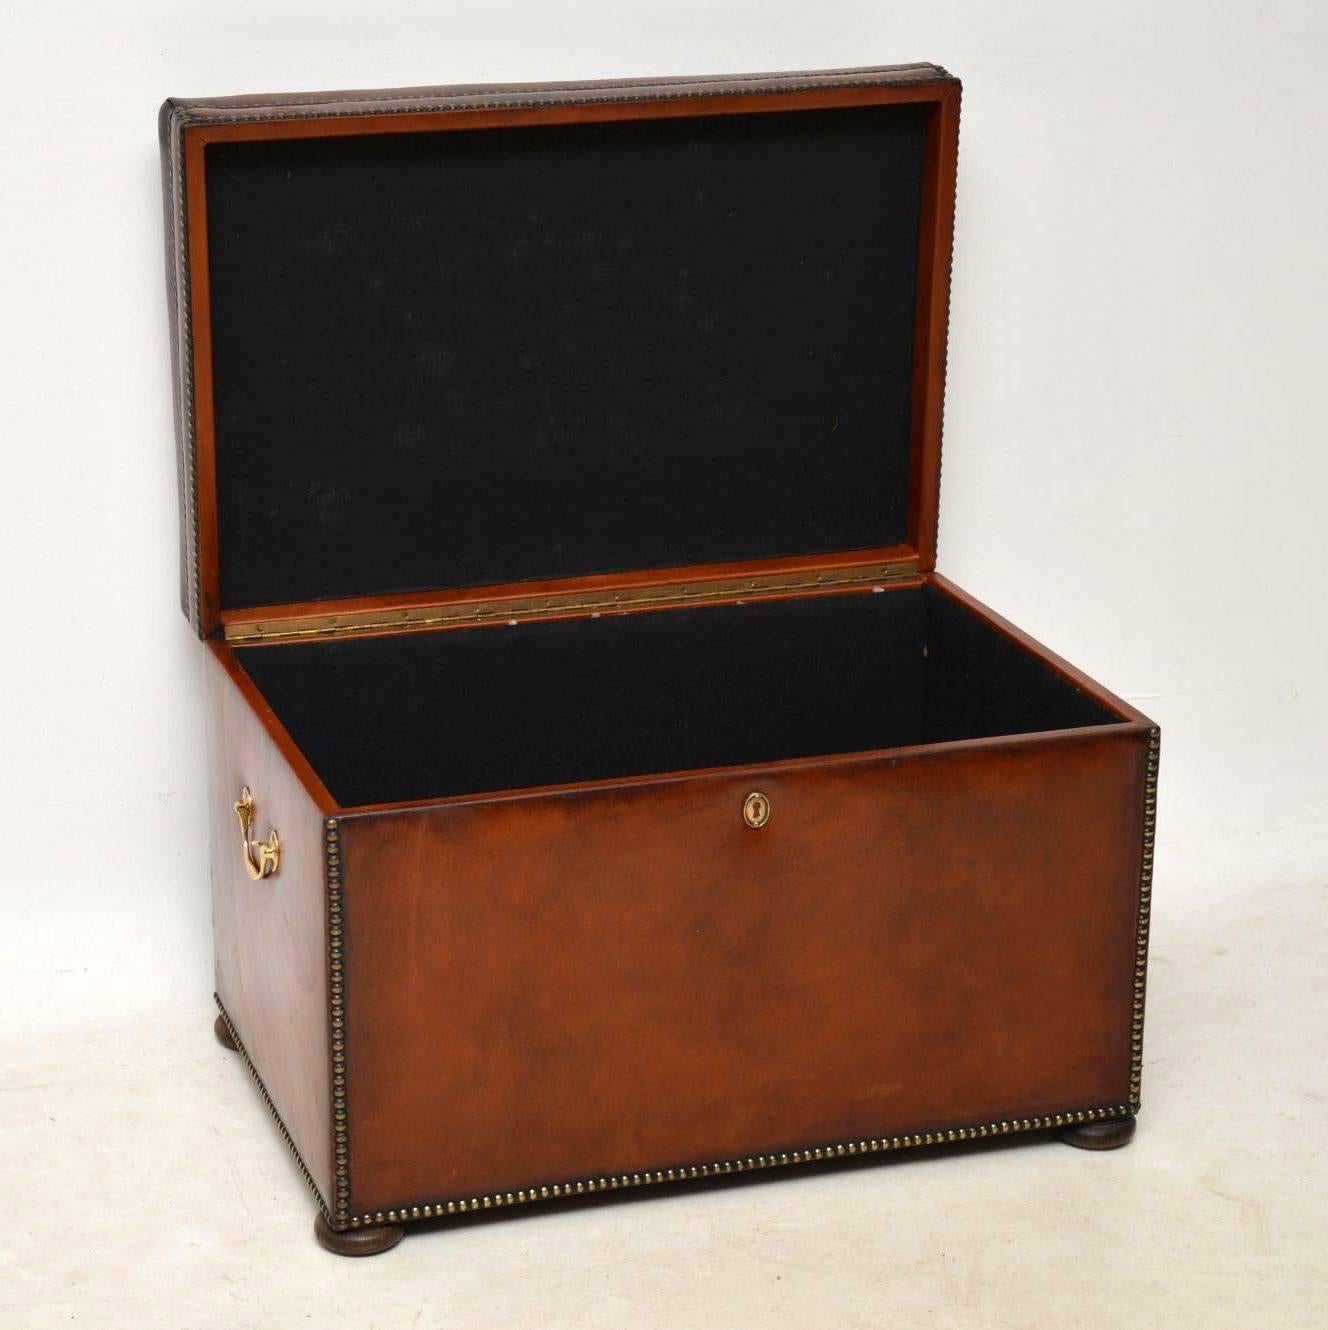 Antique Victorian style hand colored leather trunk in excellent condition with a lift up seat and plenty of storage inside. The leather is all hand tacked onto the frame and there are brass handles on the sides. This trunk sits on flat bun feet.